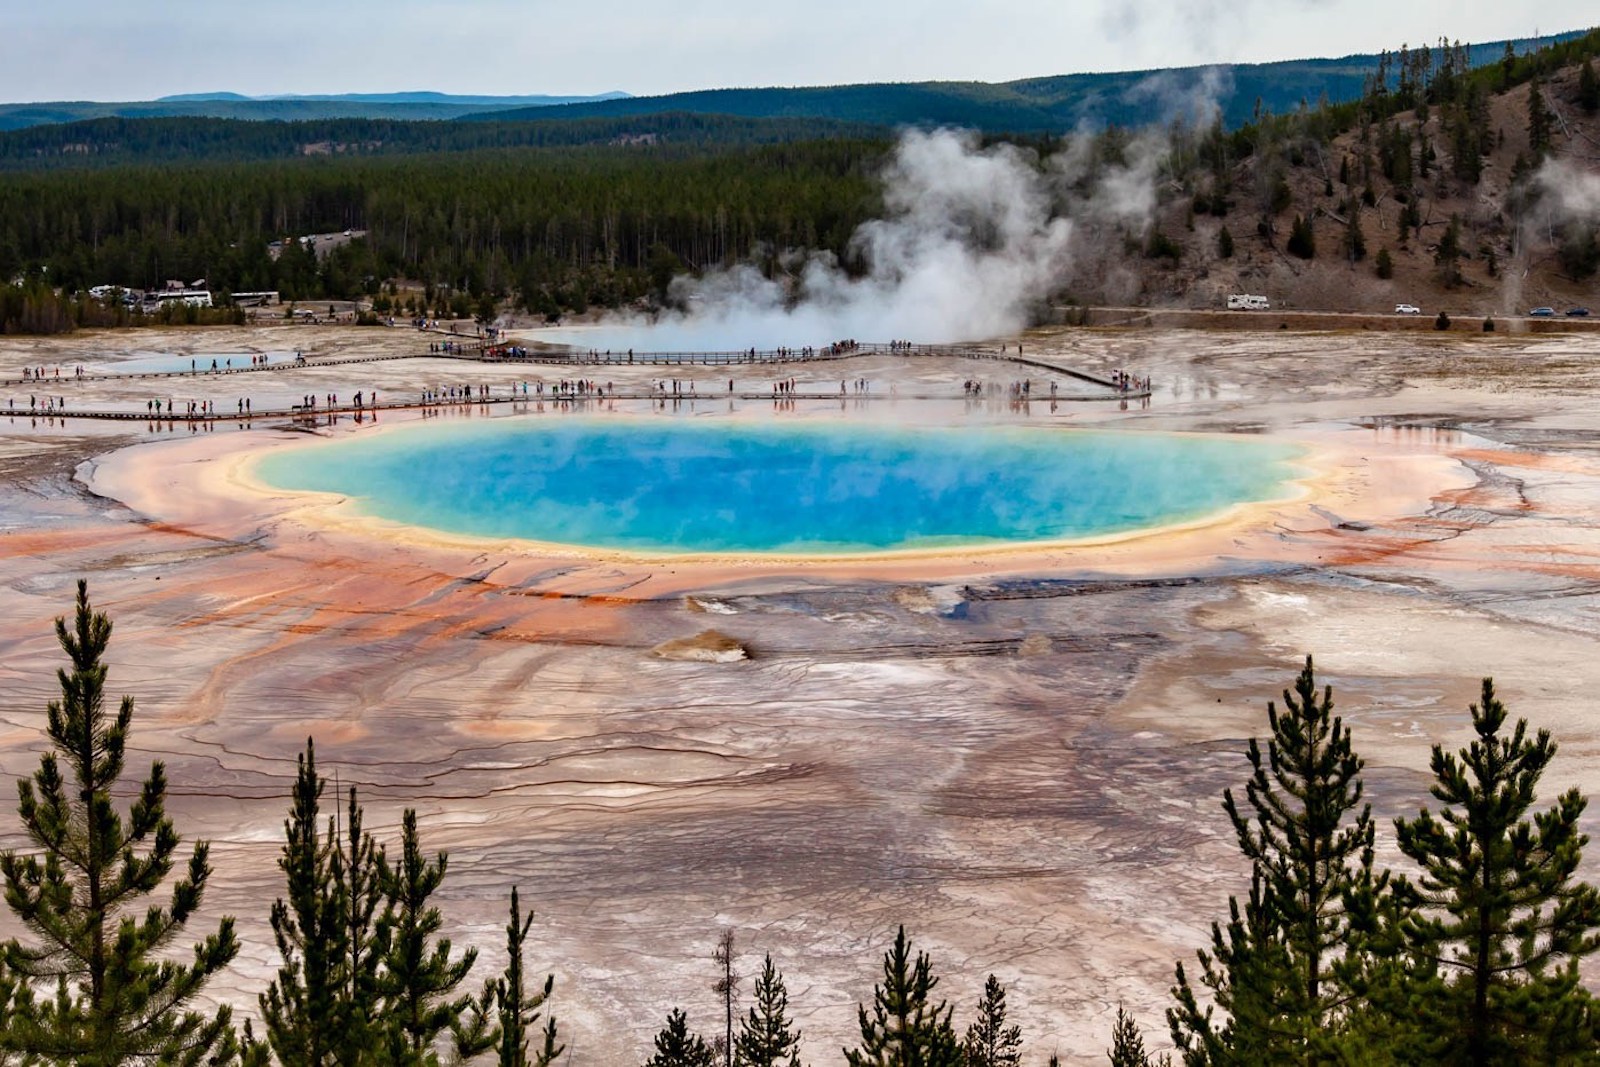 Grand Prismatic Spring Overlook, Yellowstone National Park, Wyoming | Photo Credit: Vezzani Photography